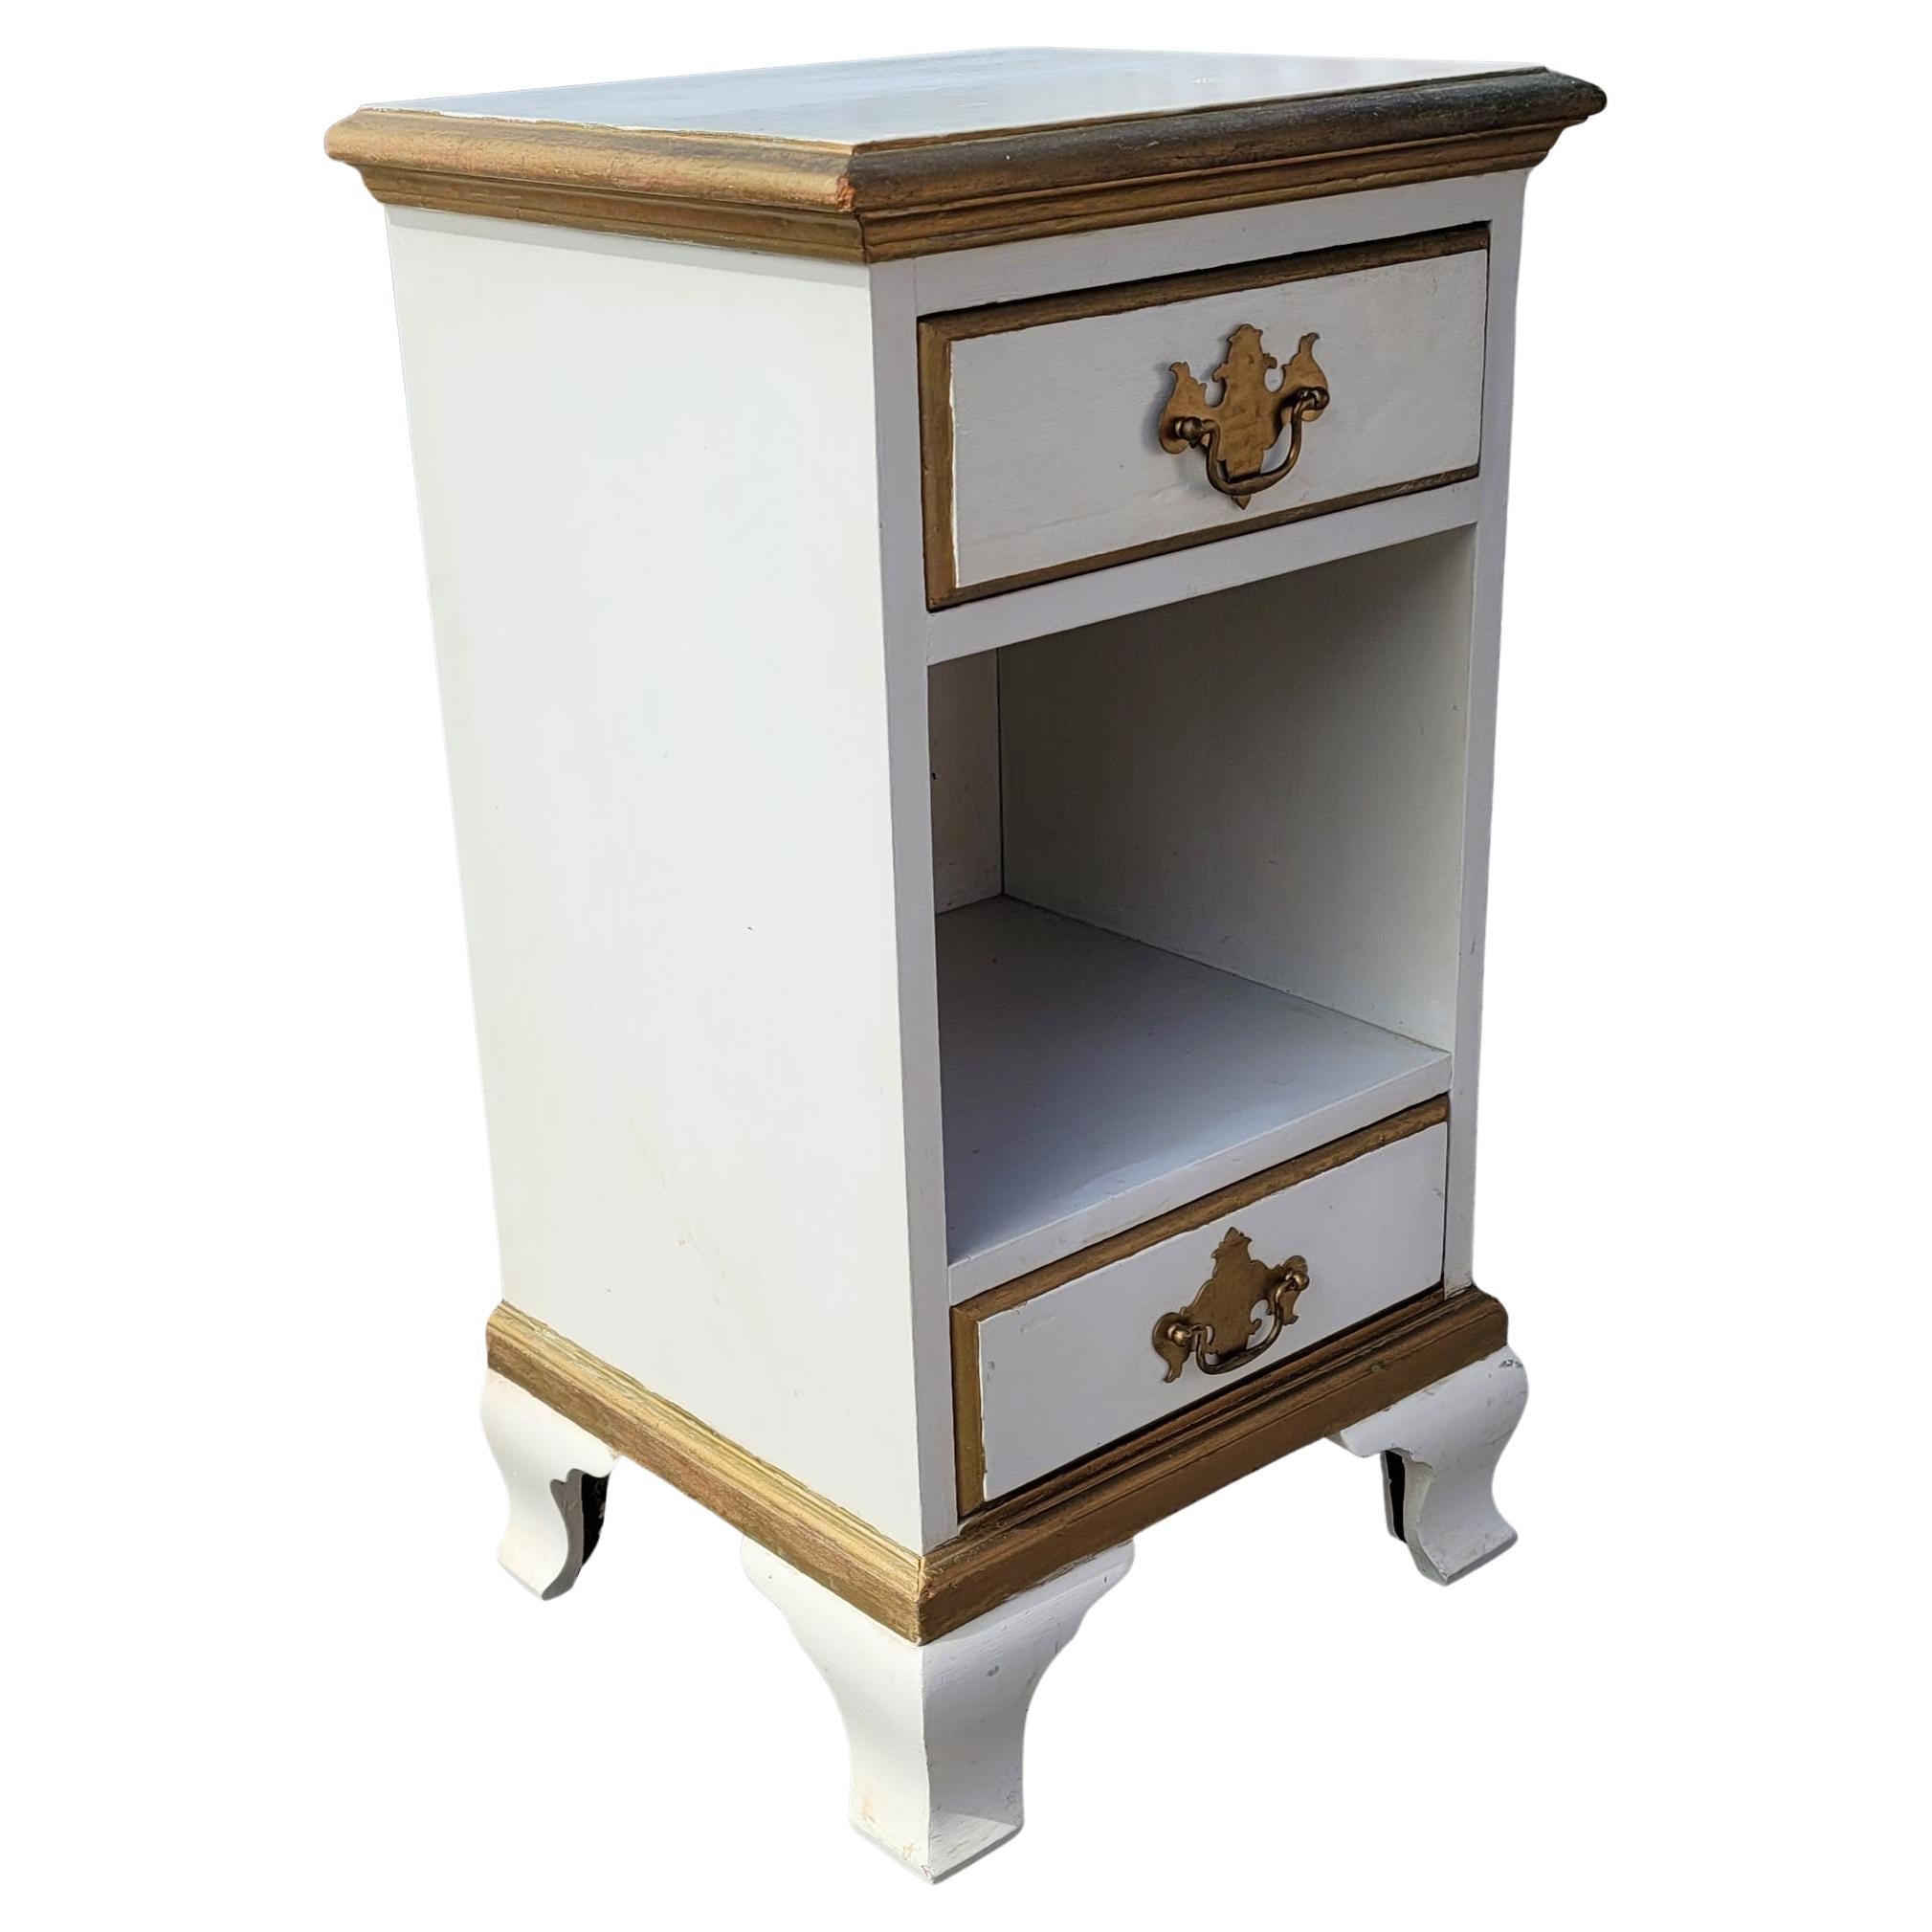 A 1950s French Provincial painted and gilded nightstand or bedside table in good condition. 
Antique white color painted with giltwood trims. Measure 16